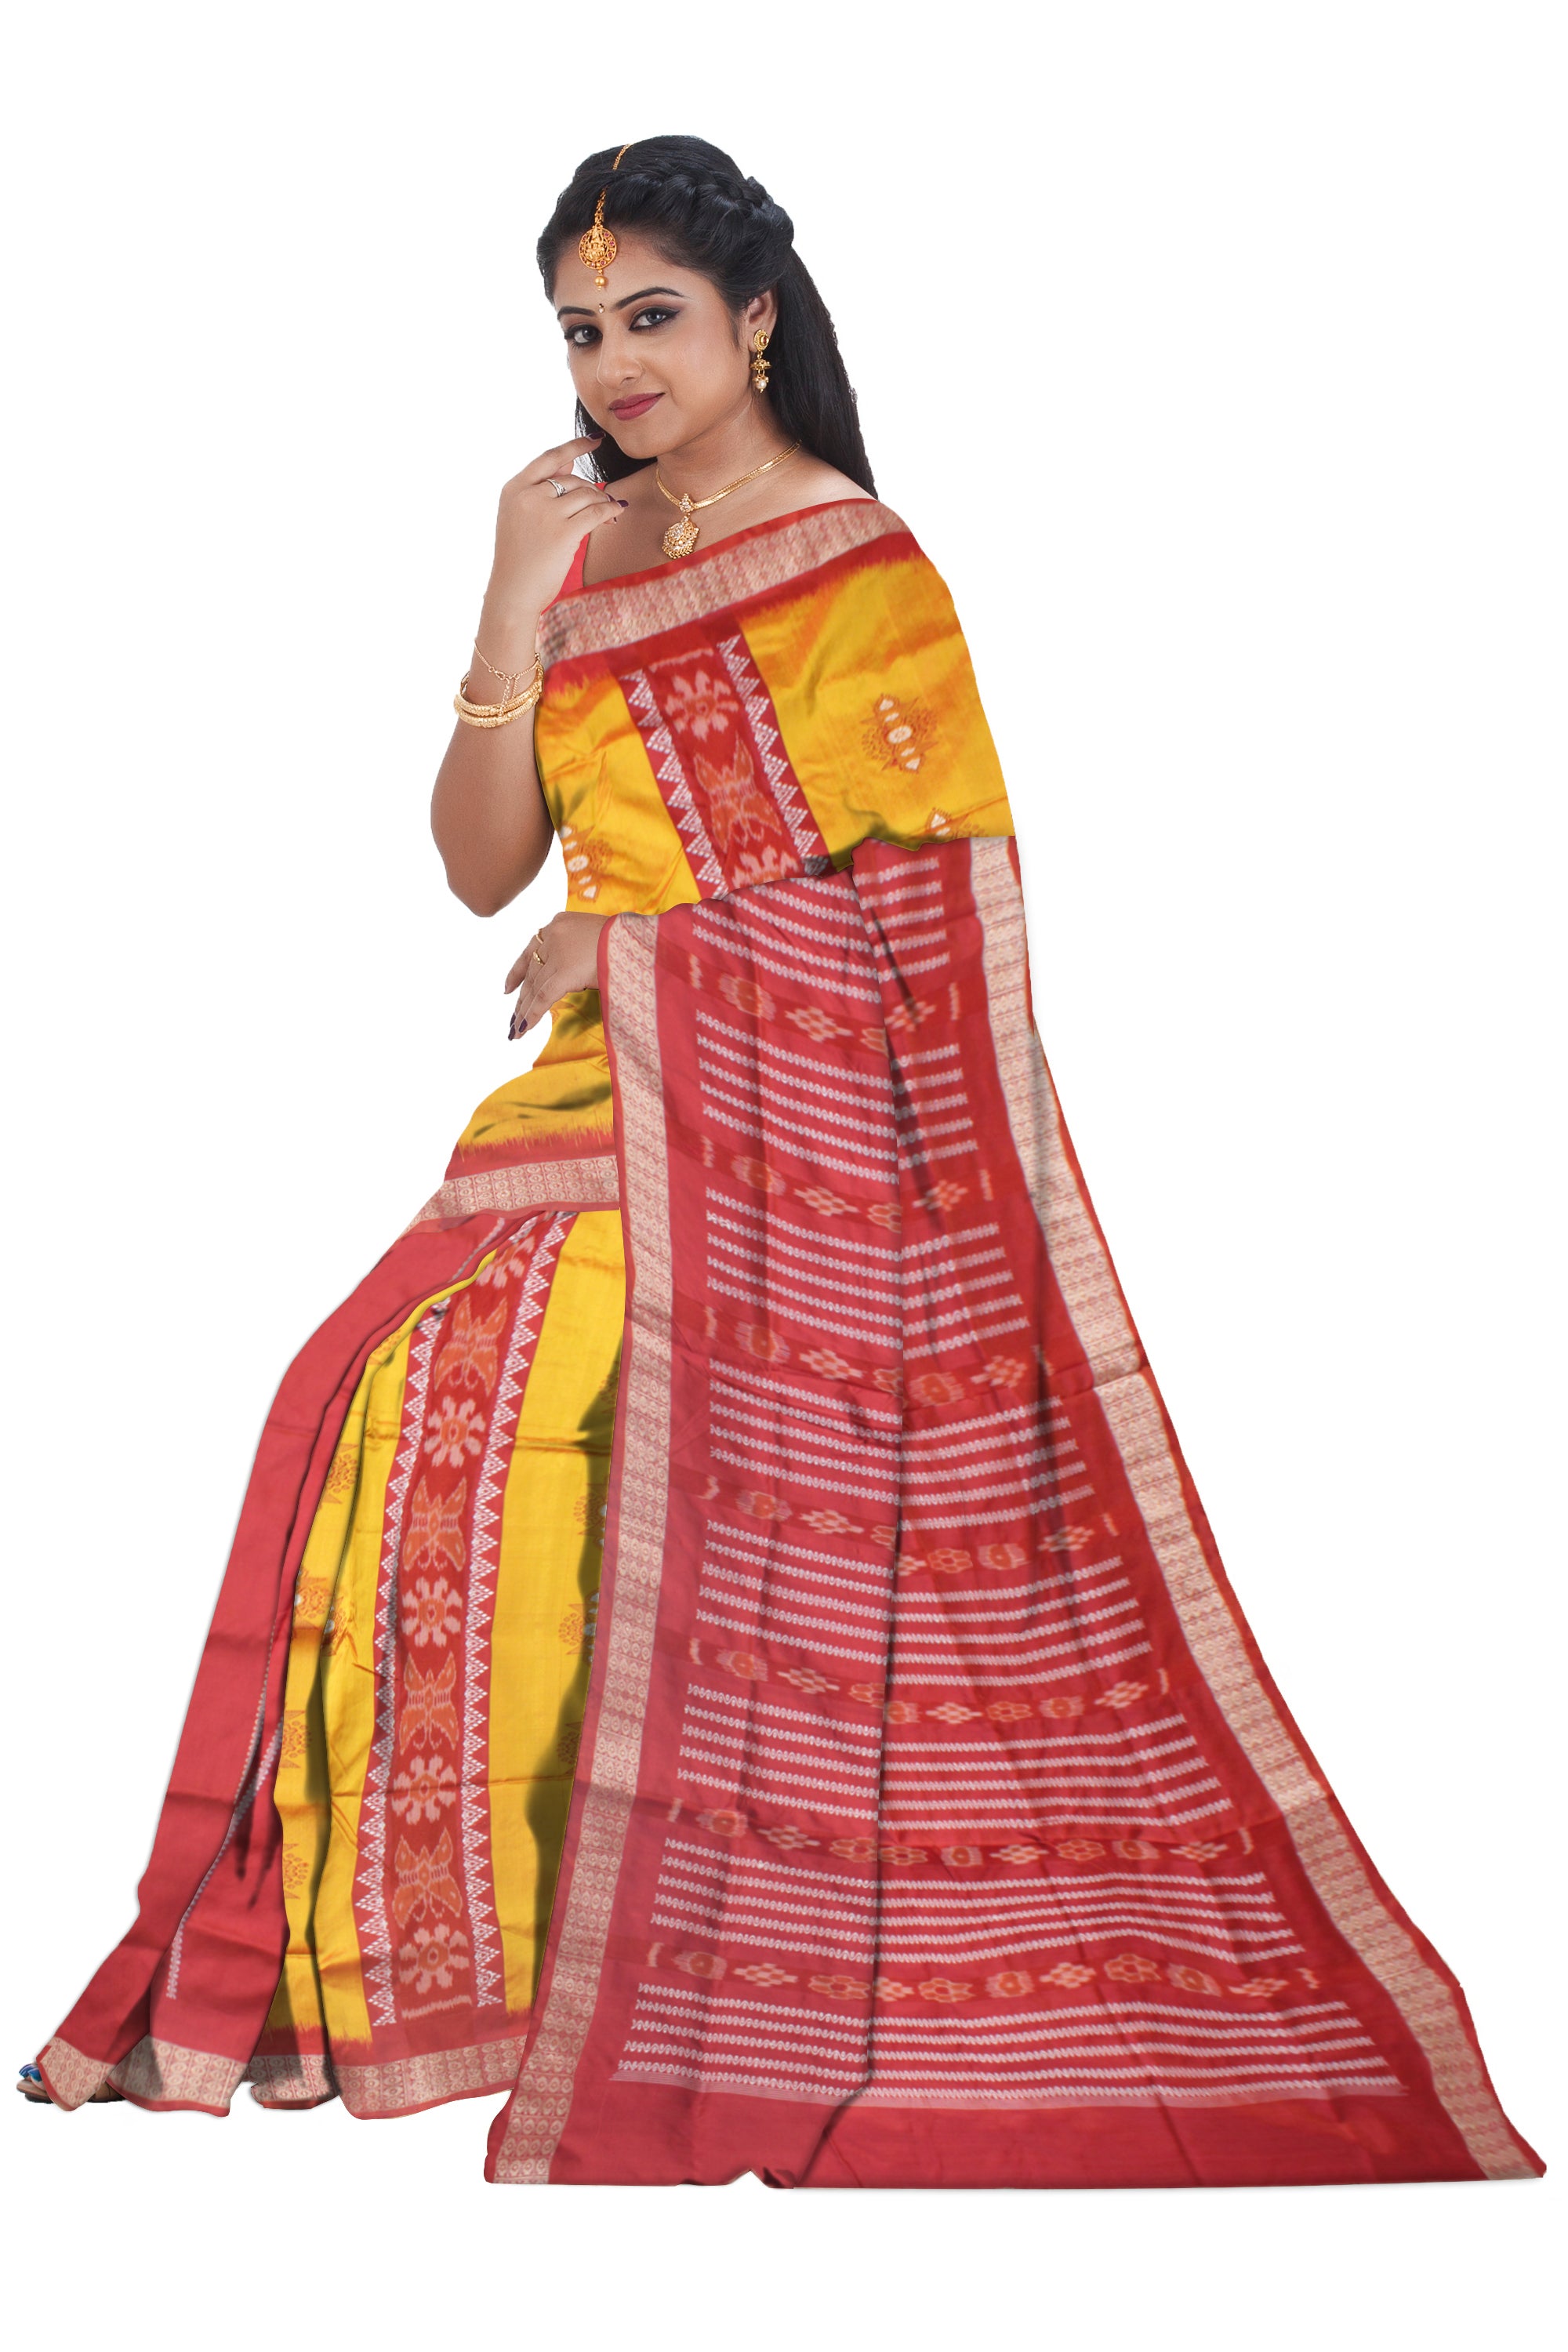 BUTTERFLY PATTERN YELLOW AND MAROON COLOR PATLI PATA SAREE, WITH MATCHING BLOUSE PIECE. - Koshali Arts & Crafts Enterprise